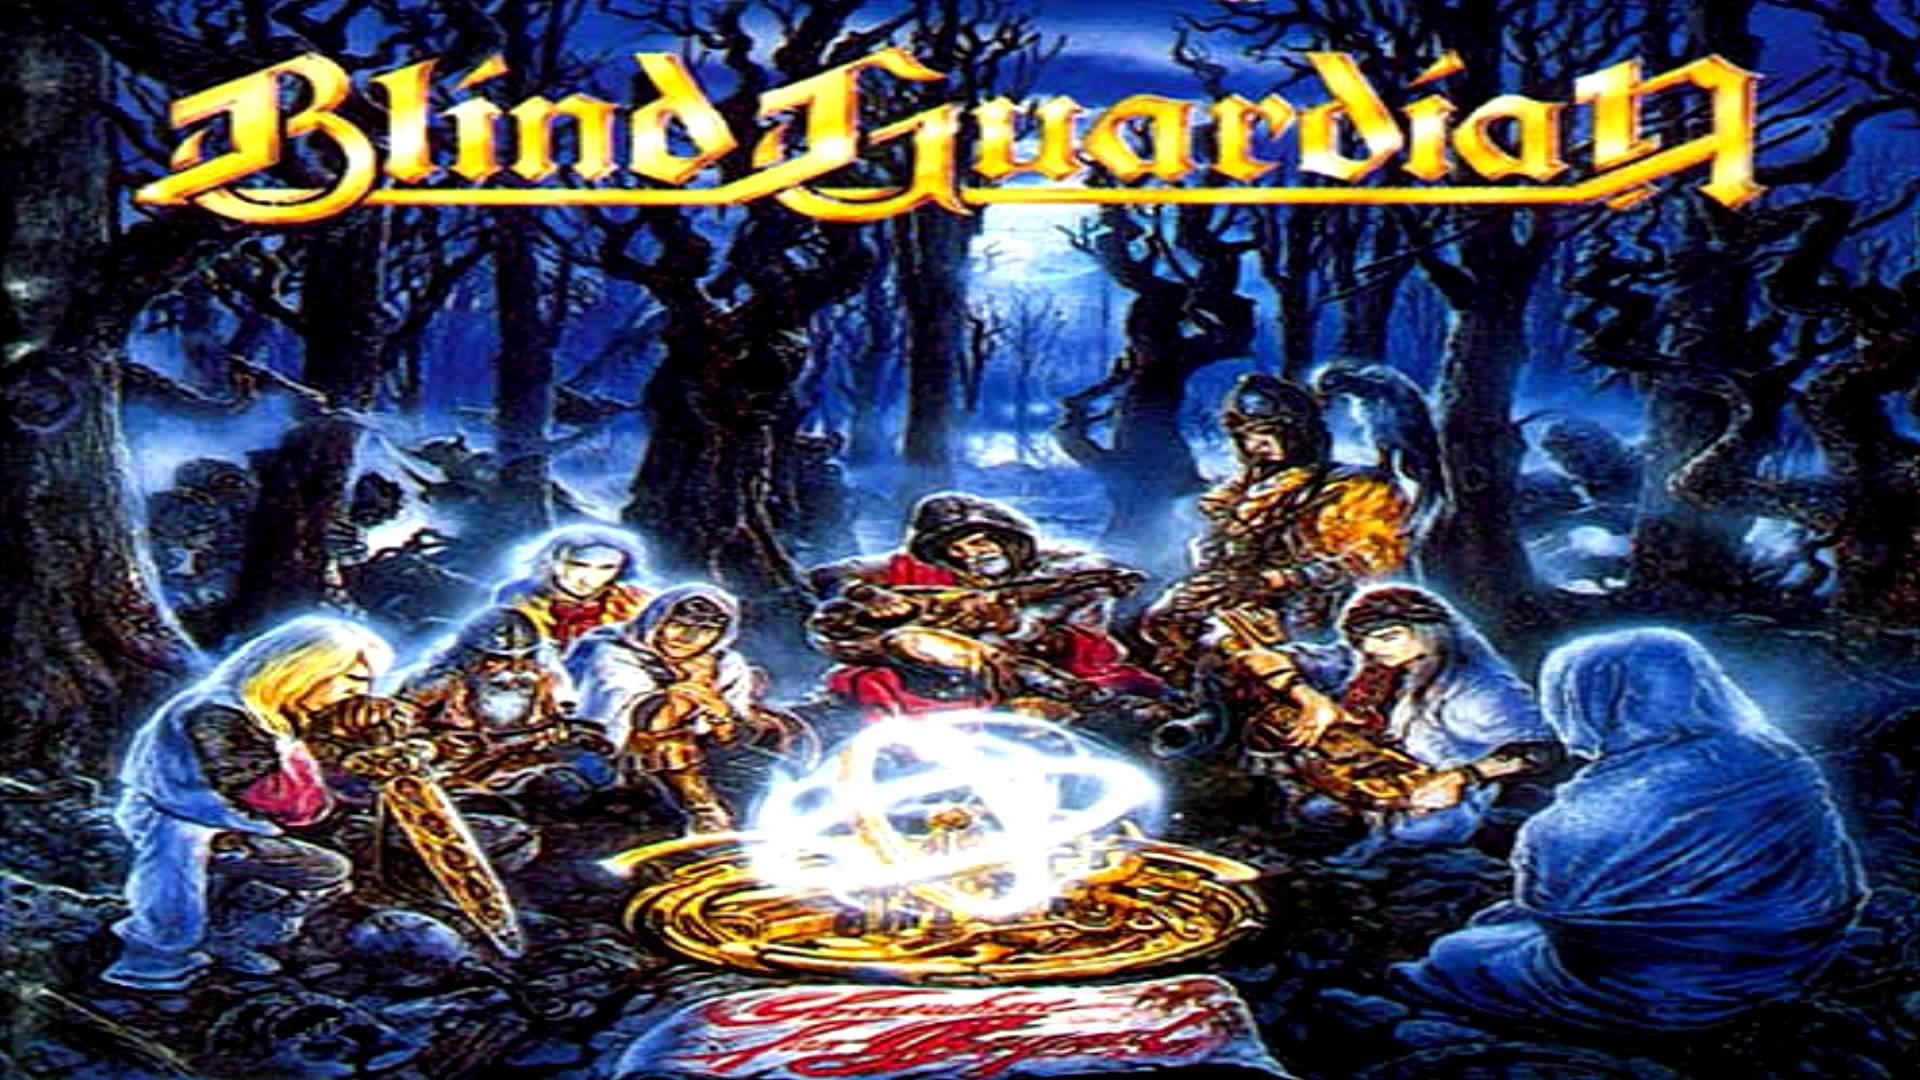 Blind Guardian - Bard's Song: In the forest - YouTube